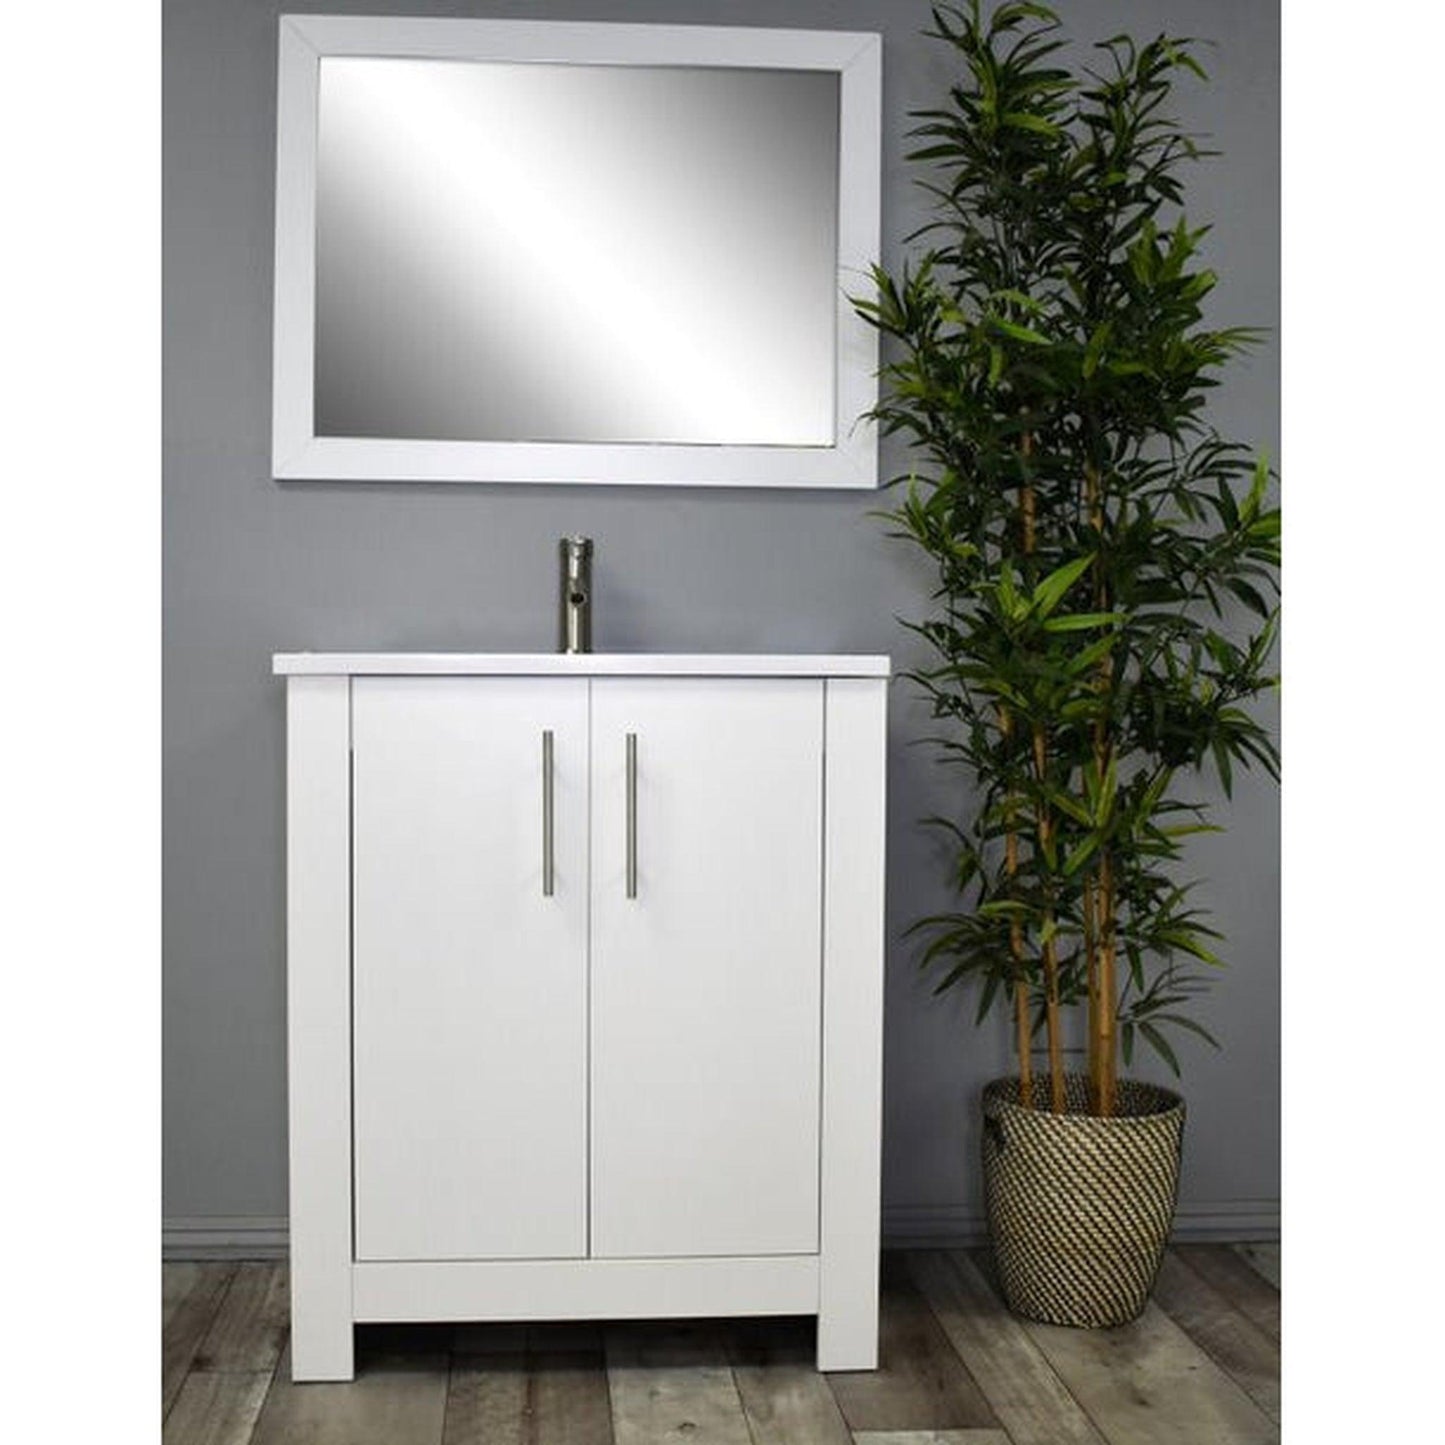 Volpa USA Austin 30" x 20" Glossy White Modern Freestanding Bathroom Vanity With Acrylic Top, Integrated Acrylic Sink And Brushed Nickel Handles